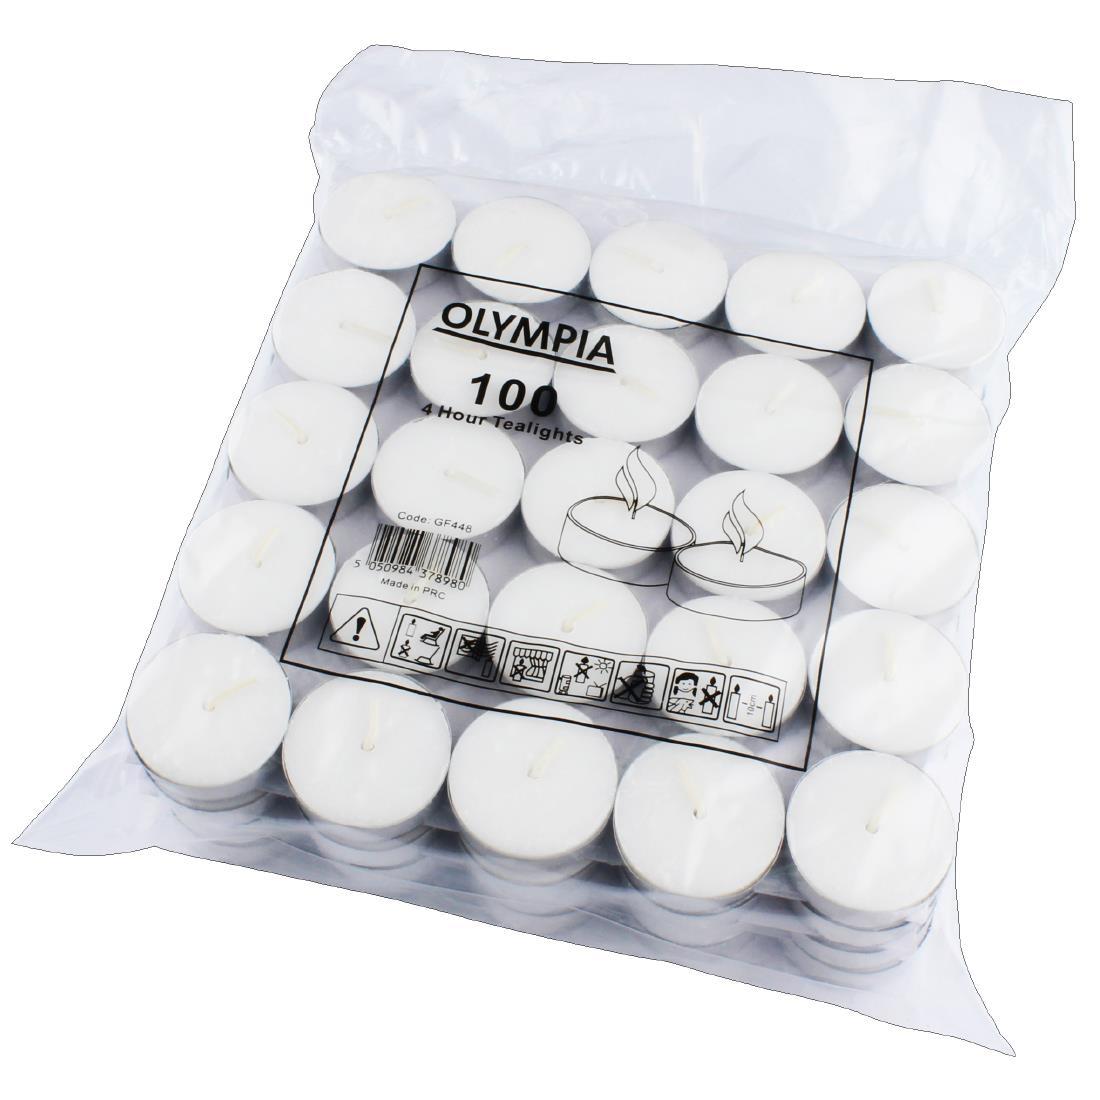 Olympia 4 Hour Tealights (Pack of 100) - GF448  - 8